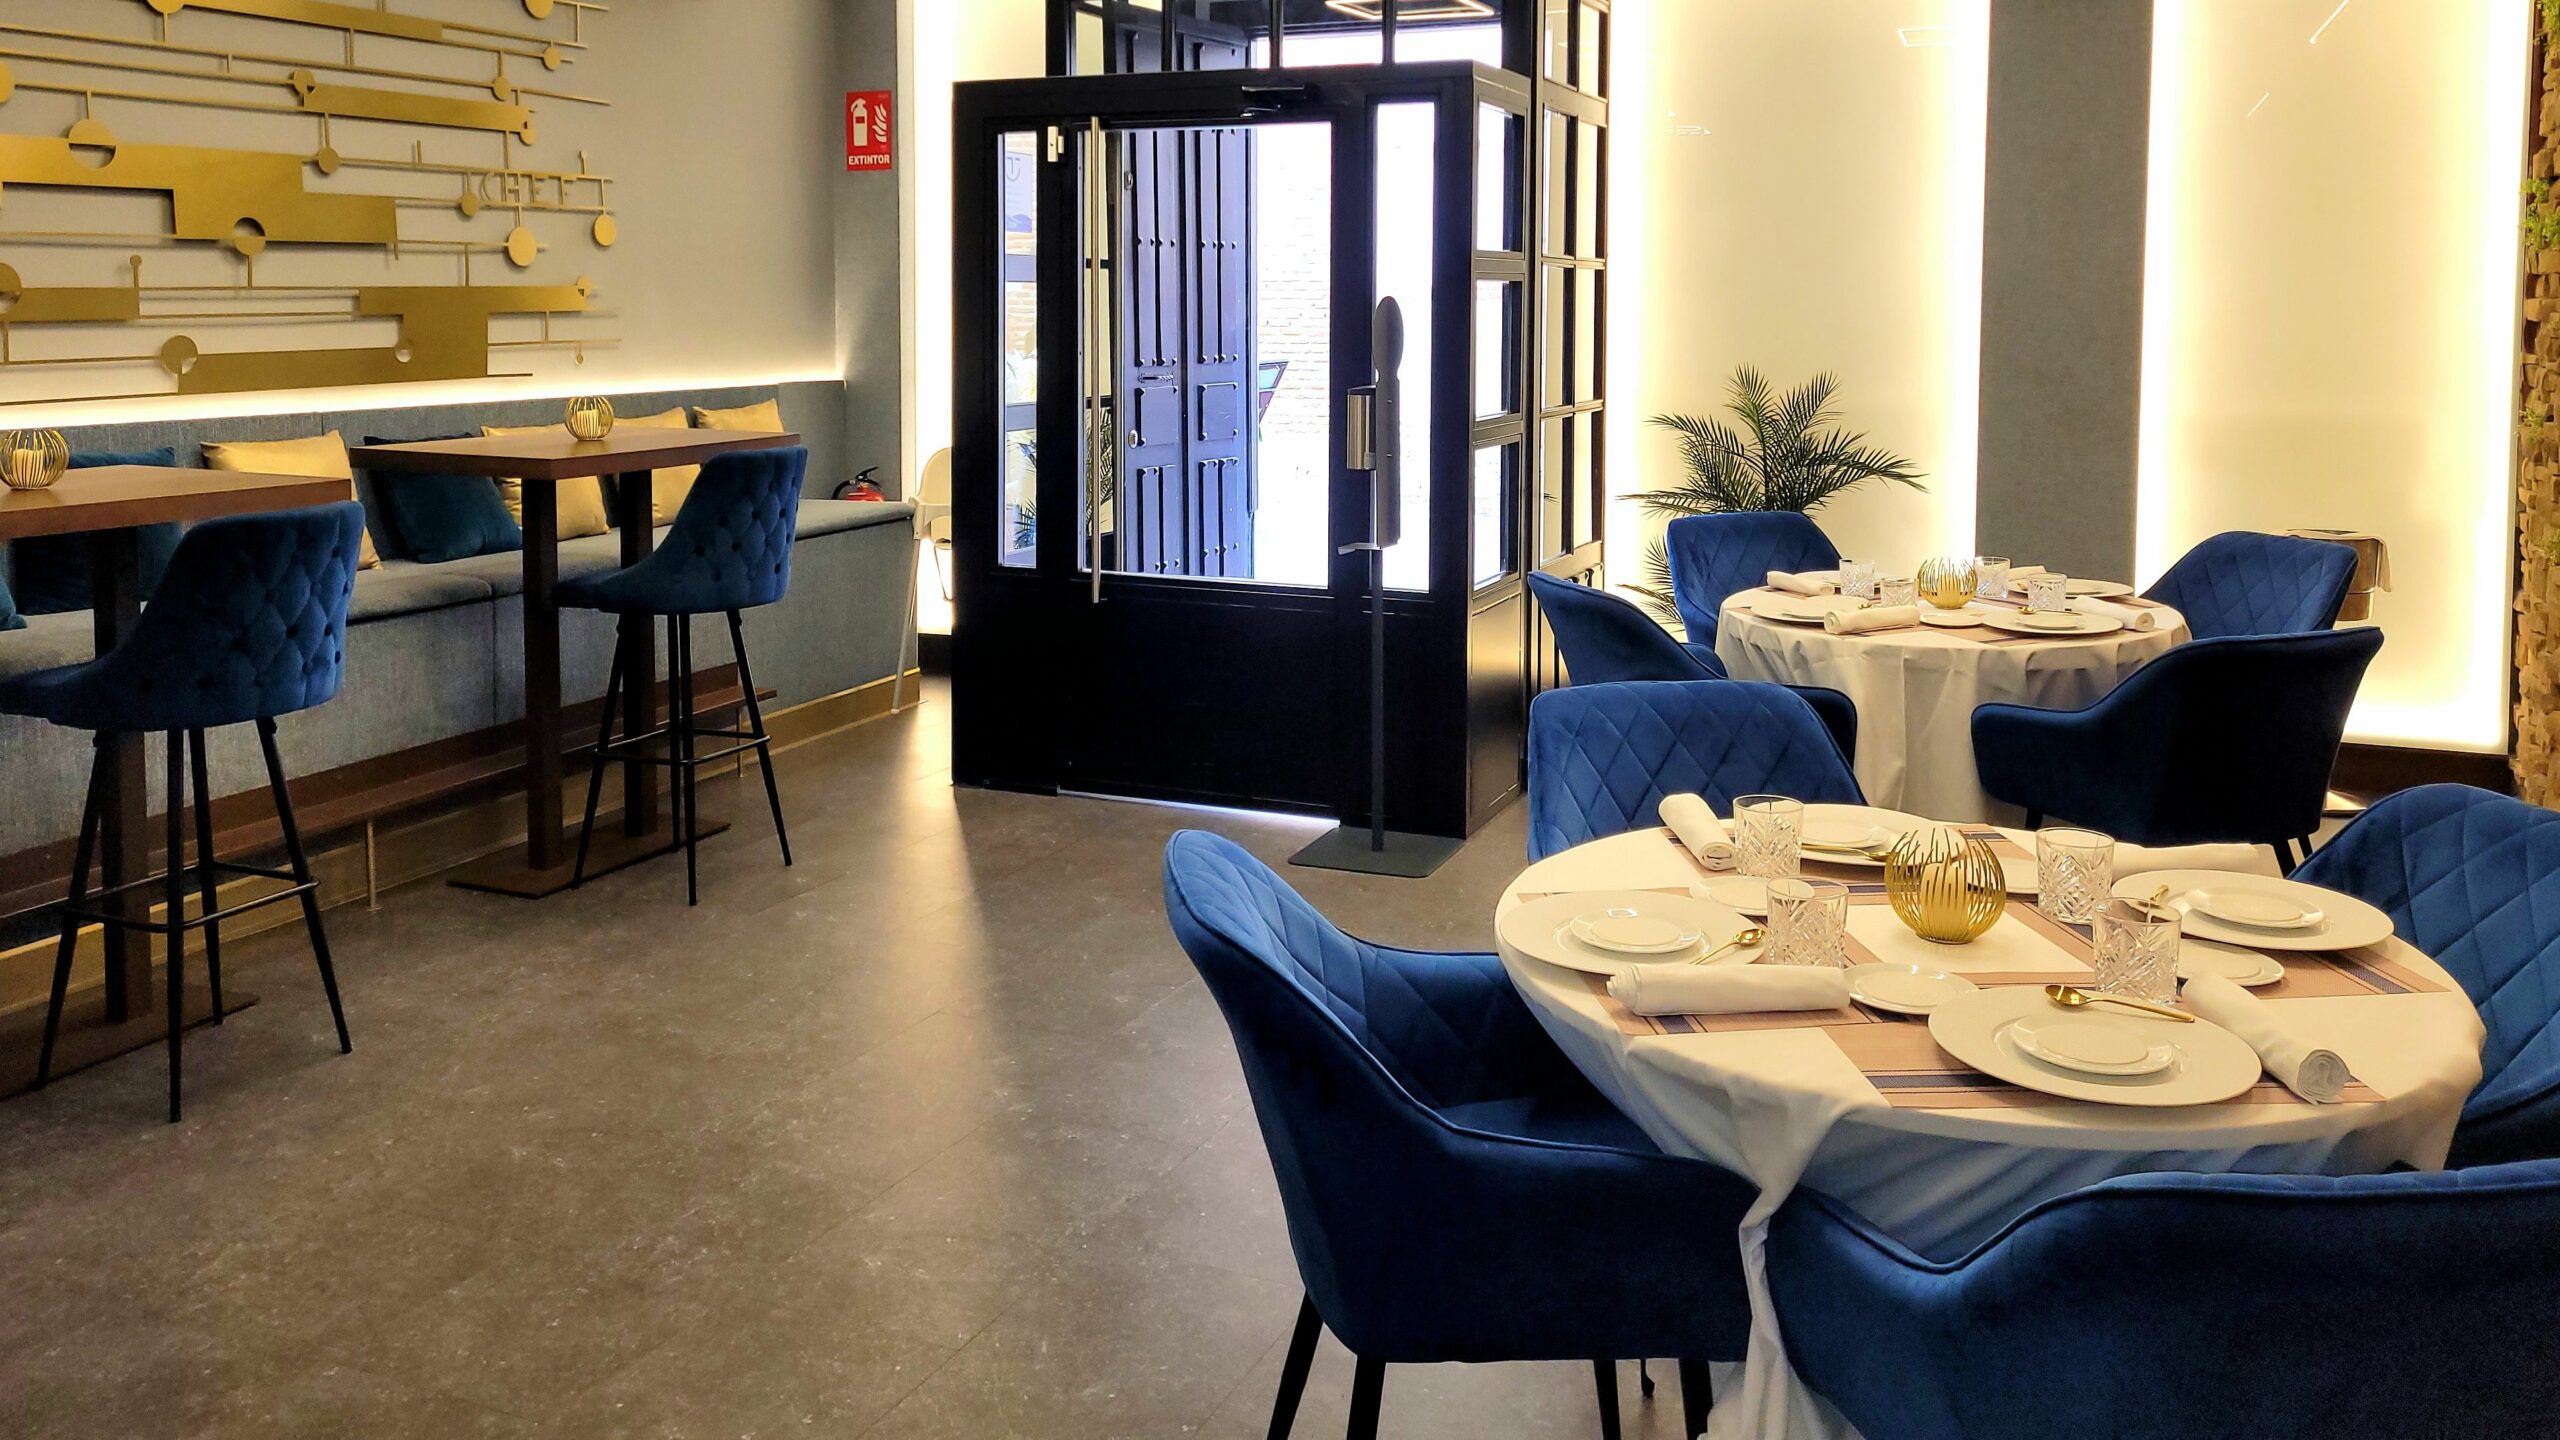 eximio by fernando martin a must try restaurant for foodies in alcala de henares